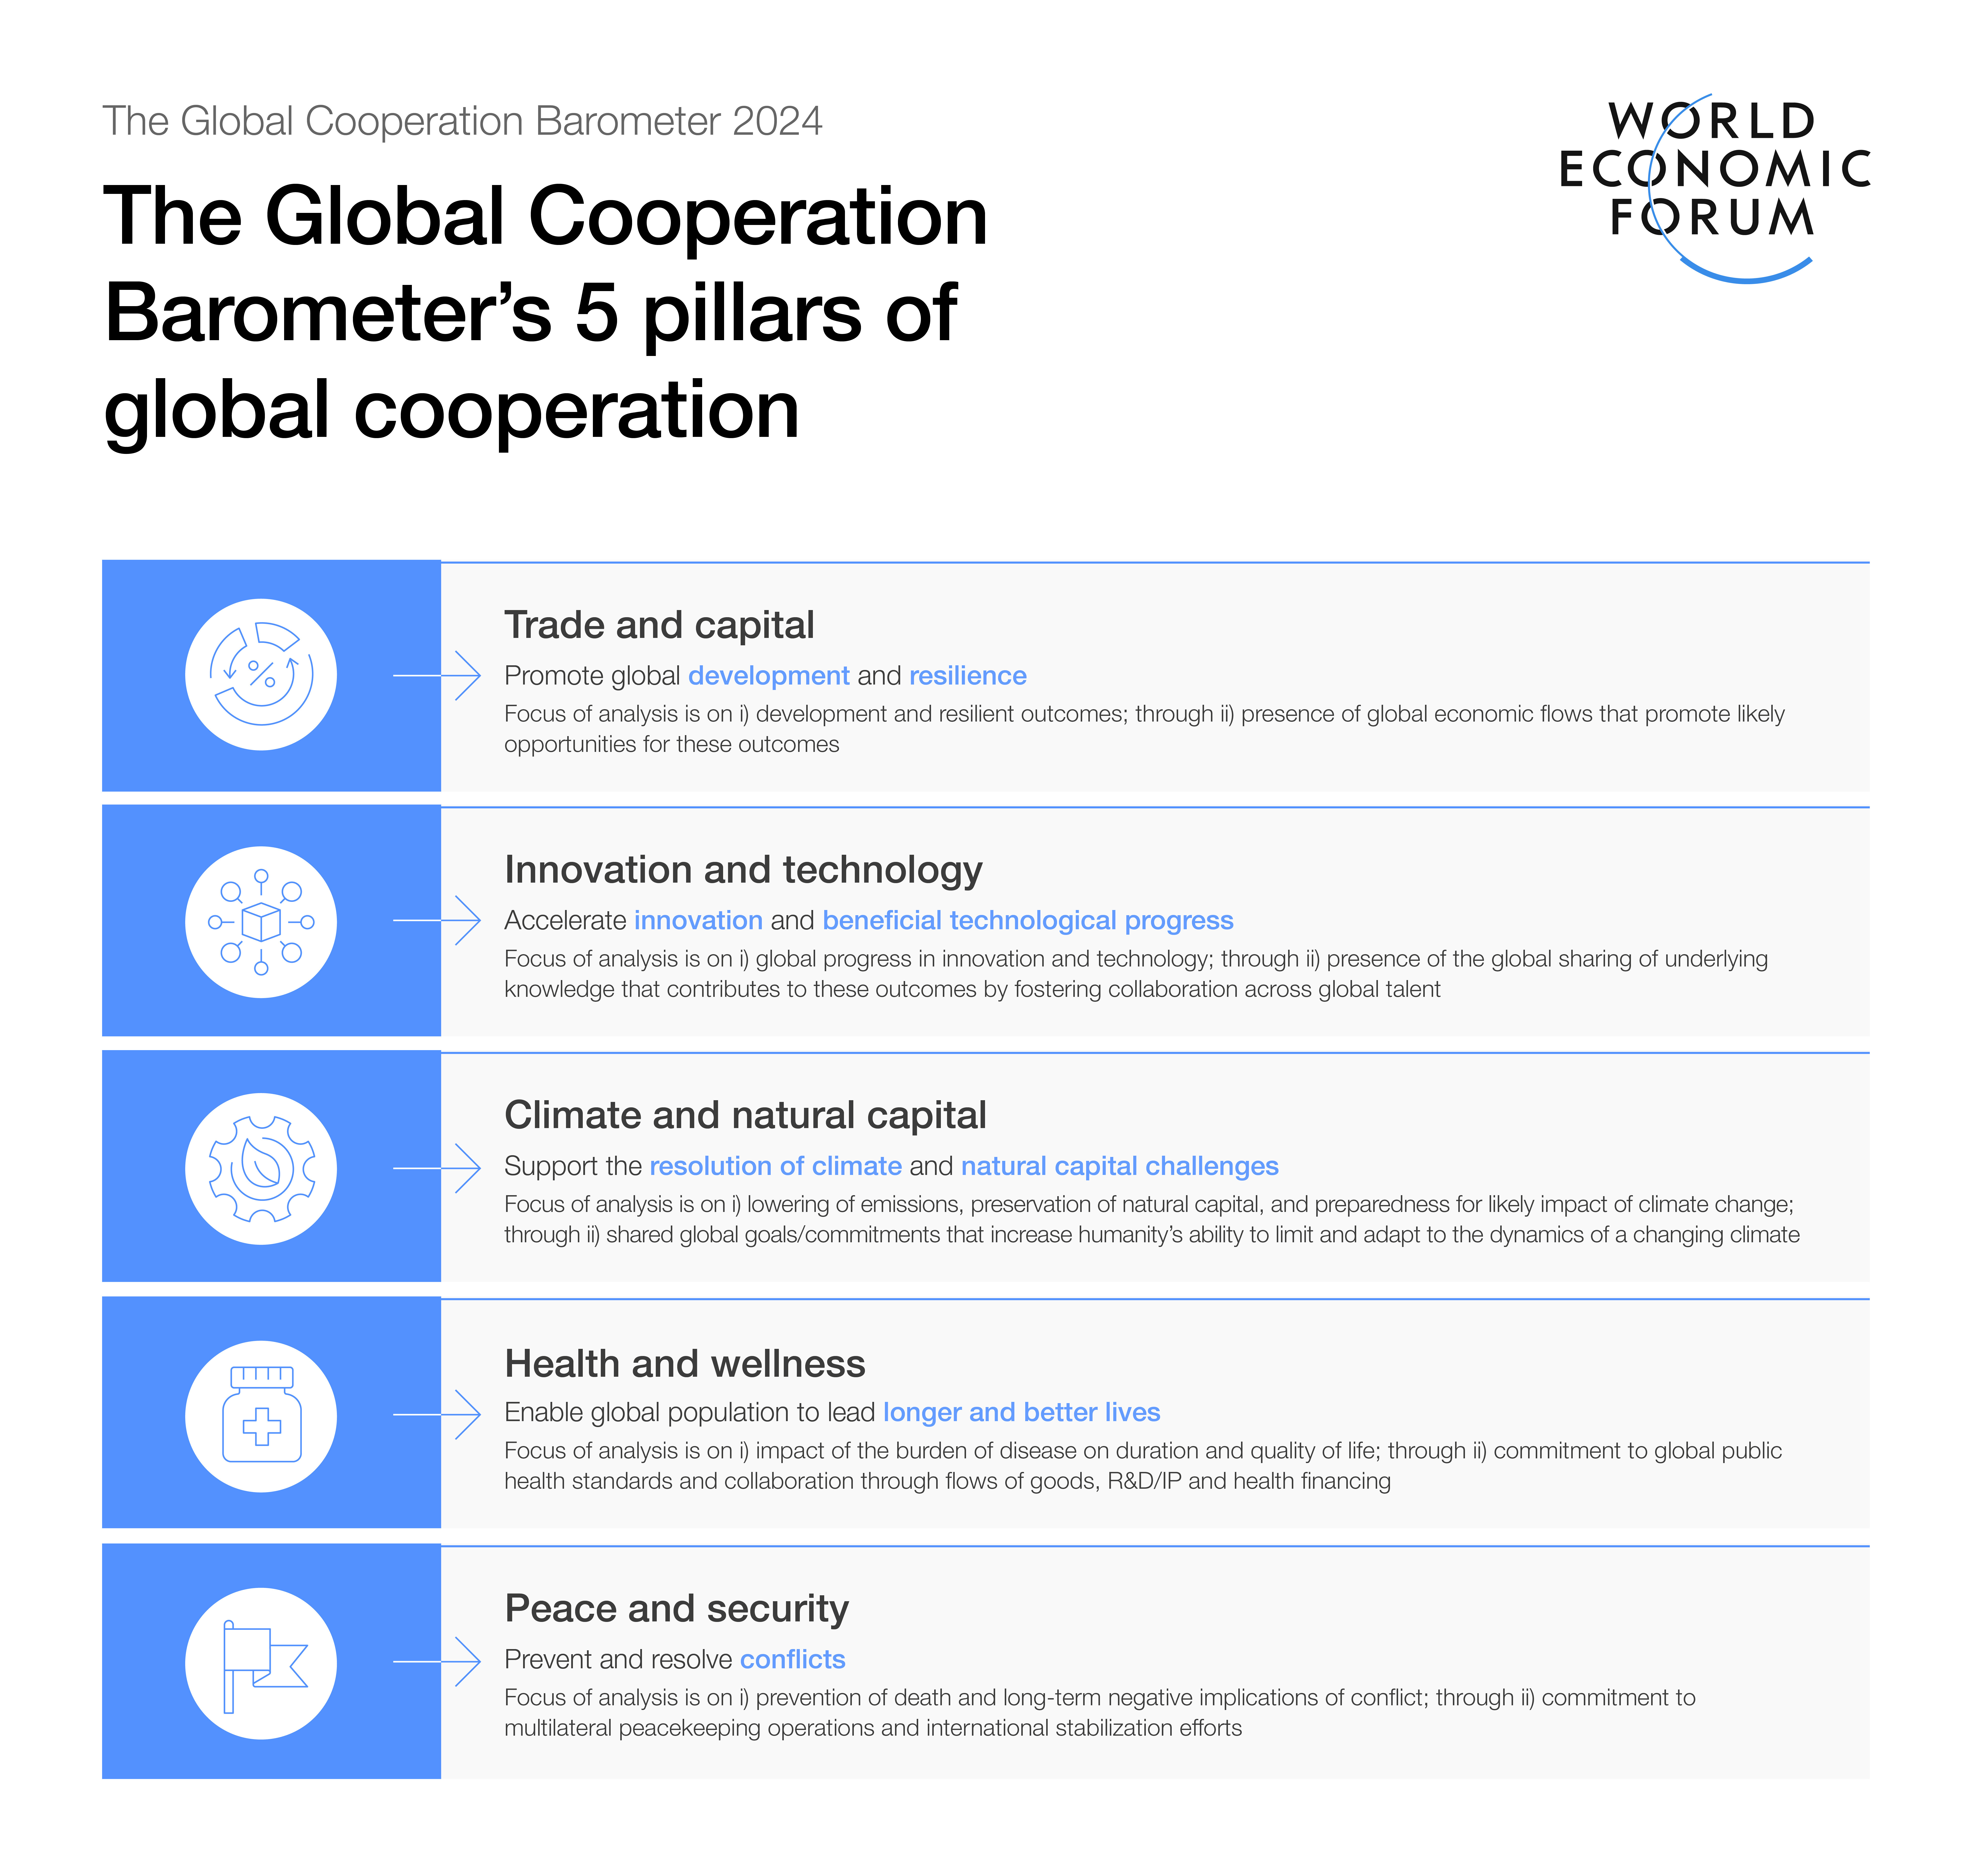 The Global Cooperation Barometer's 5 pillars of global cooperation.